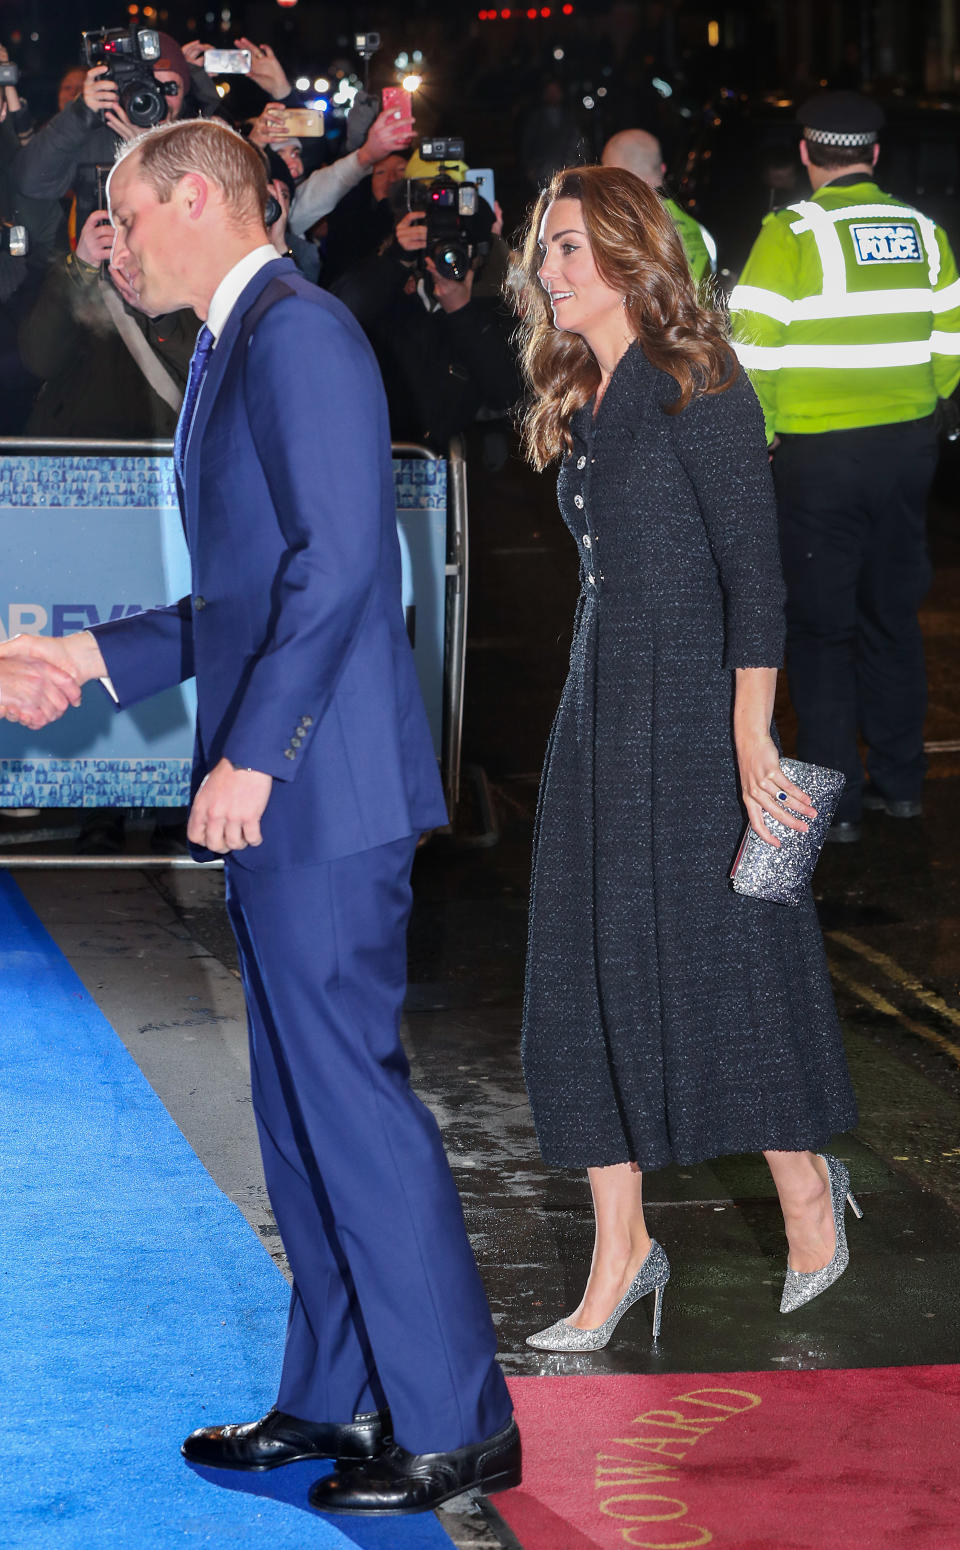 LONDON, ENGLAND - FEBRUARY 25: The Duke and Duchess Of Cambridge attend a charity performance of &quot;Dear Evan Hansen&quot; in aid of The Royal Foundation at Noel Coward Theatre on February 25, 2020 in London, England. (Photo by Chris Jackson/Getty Images)